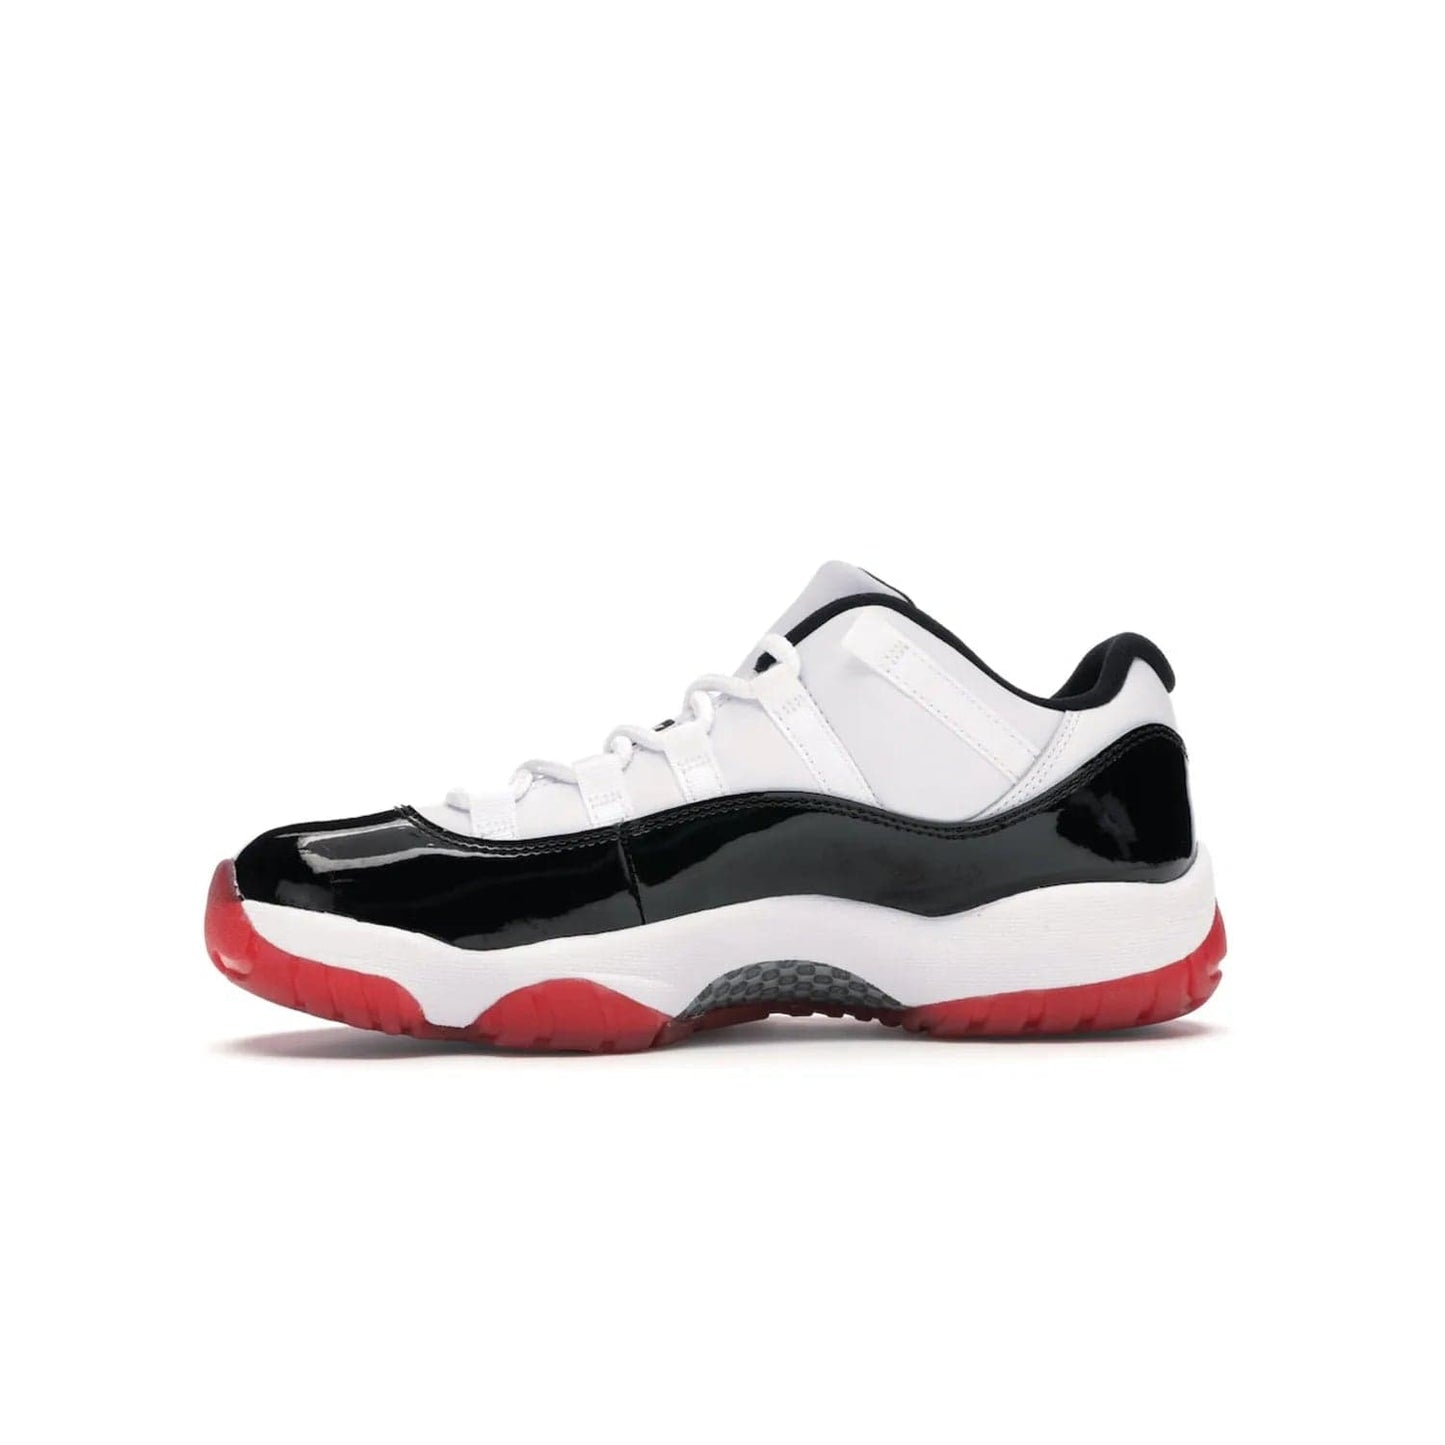 Jordan 11 Retro Low Concord Bred - Image 18 - Only at www.BallersClubKickz.com - Grab the classic Jordan 11 look with the Jordan 11 Retro Low Concord Bred. With white and black elements and the iconic red outsole of the Jordan 11 Bred, you won't miss a beat. Released in June 2020, the perfect complement to any outfit.